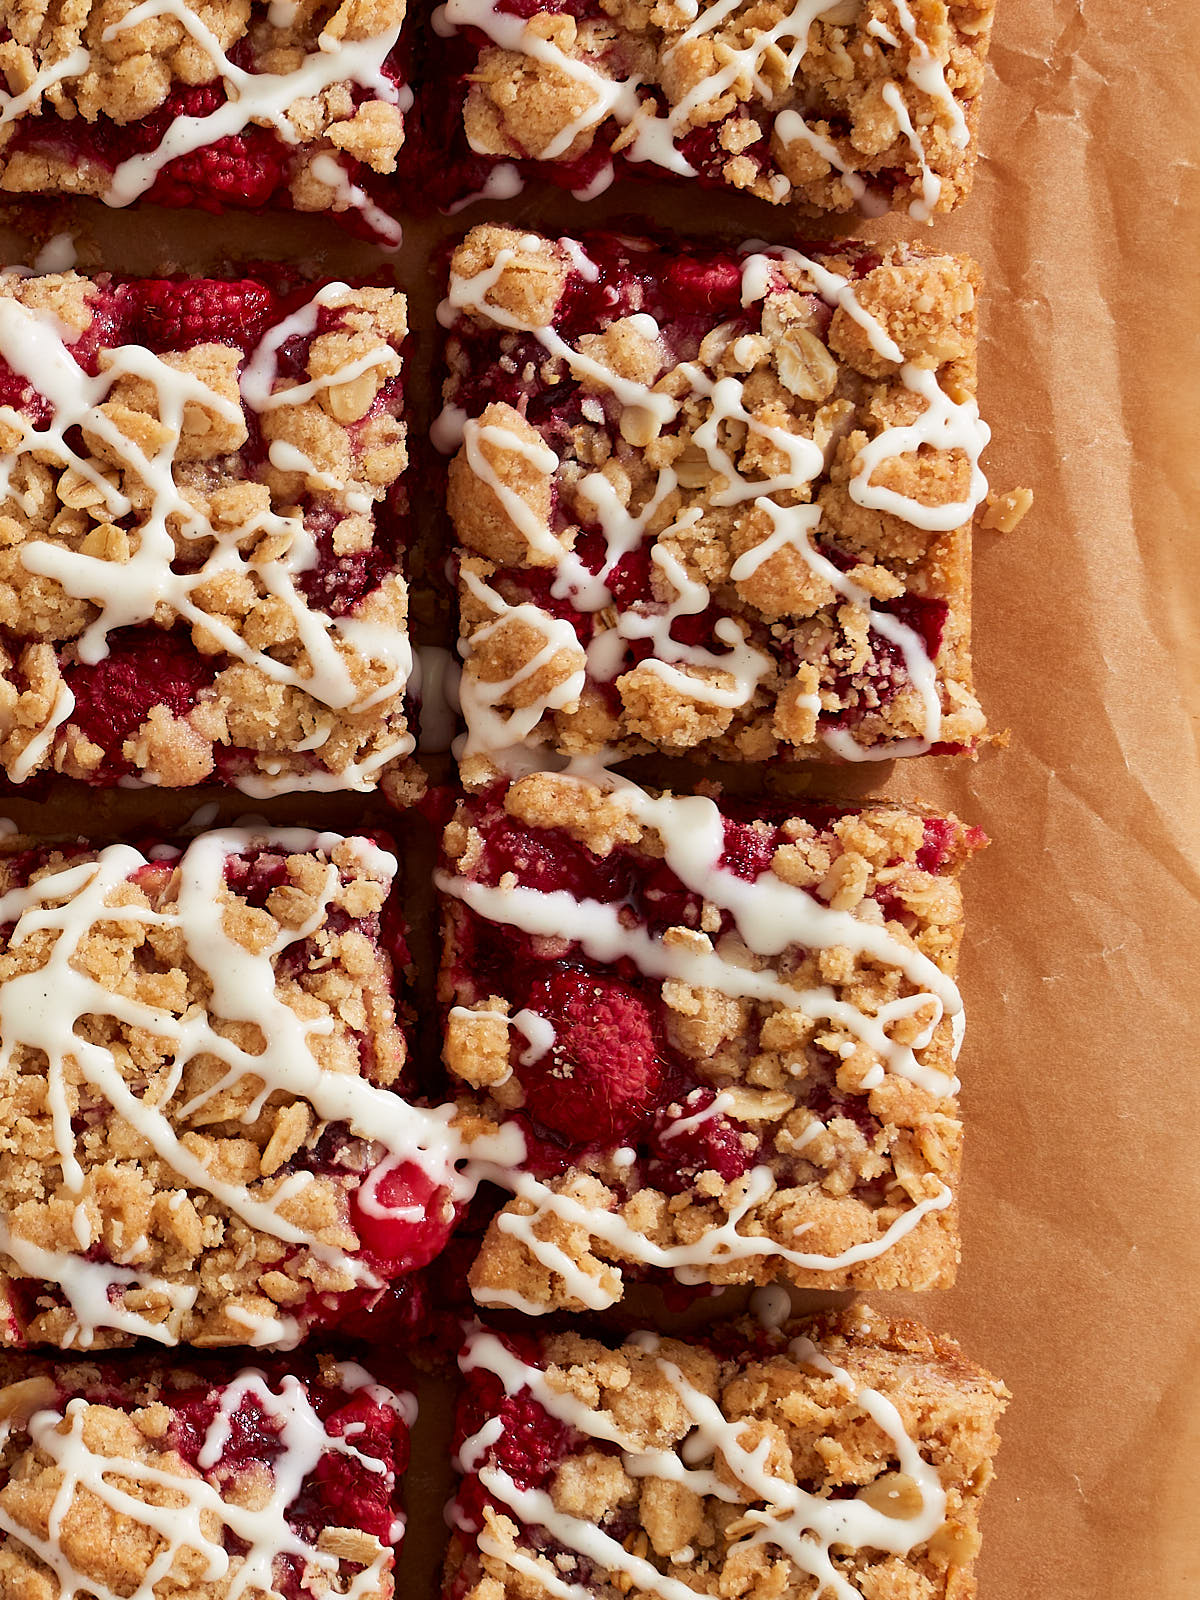 Rows of sliced raspberry and cranberry crumb bars drizzled with vanilla orange glaze on parchment paper.